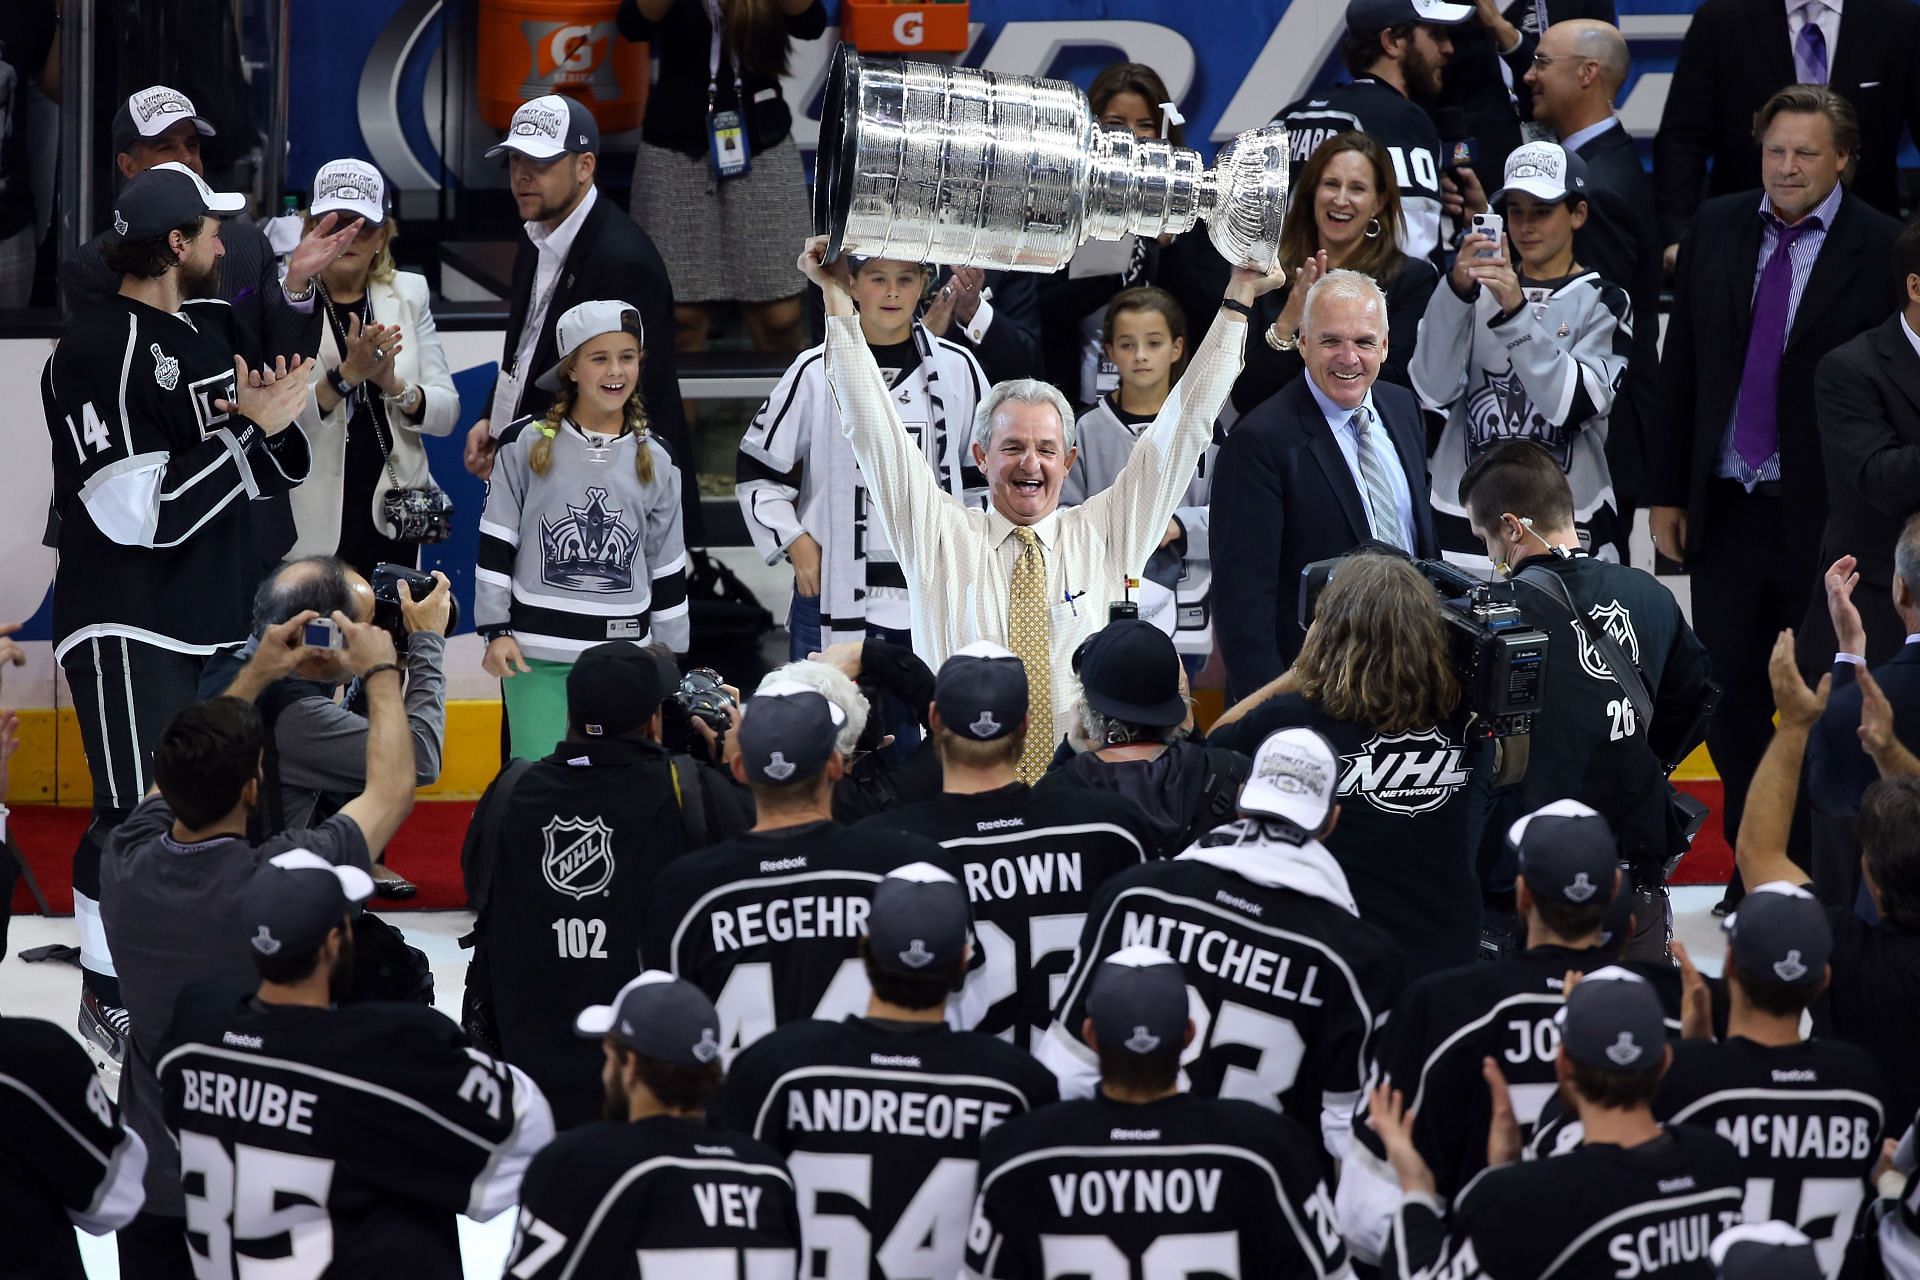 Darryl Sutter at the 2014 NHL Stanley Cup Final